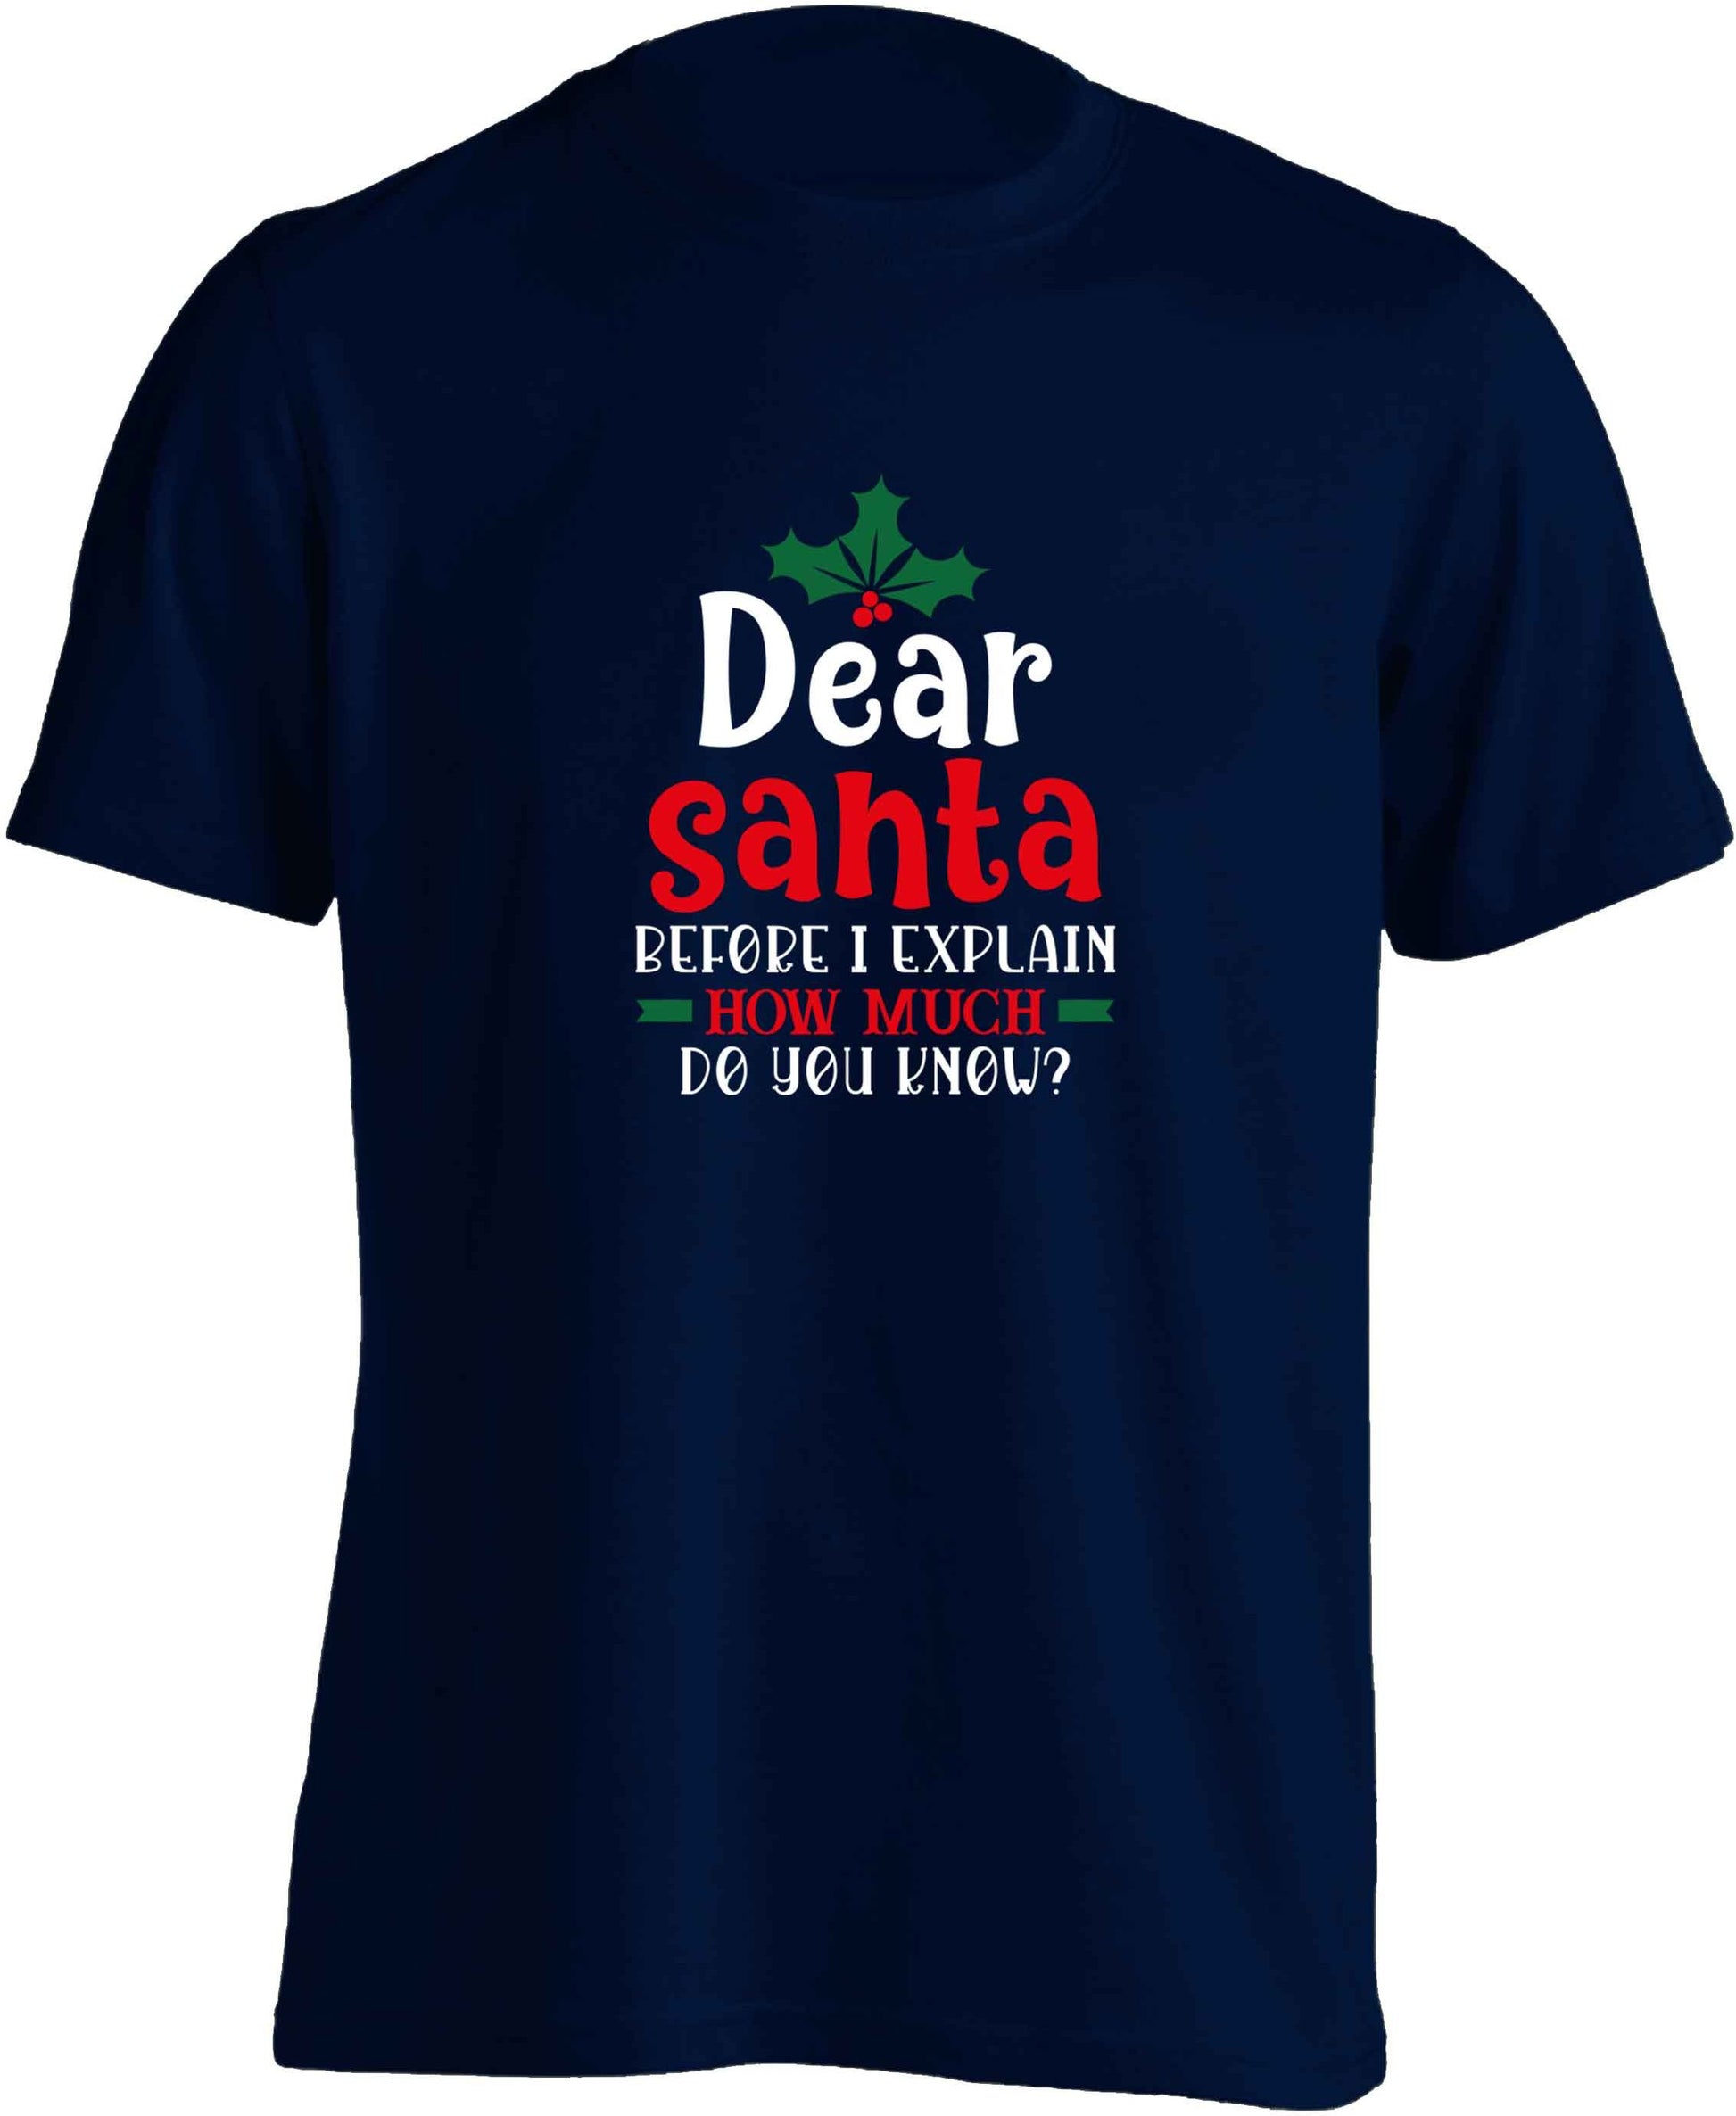 Santa before I explain how much do you know? adults unisex navy Tshirt 2XL